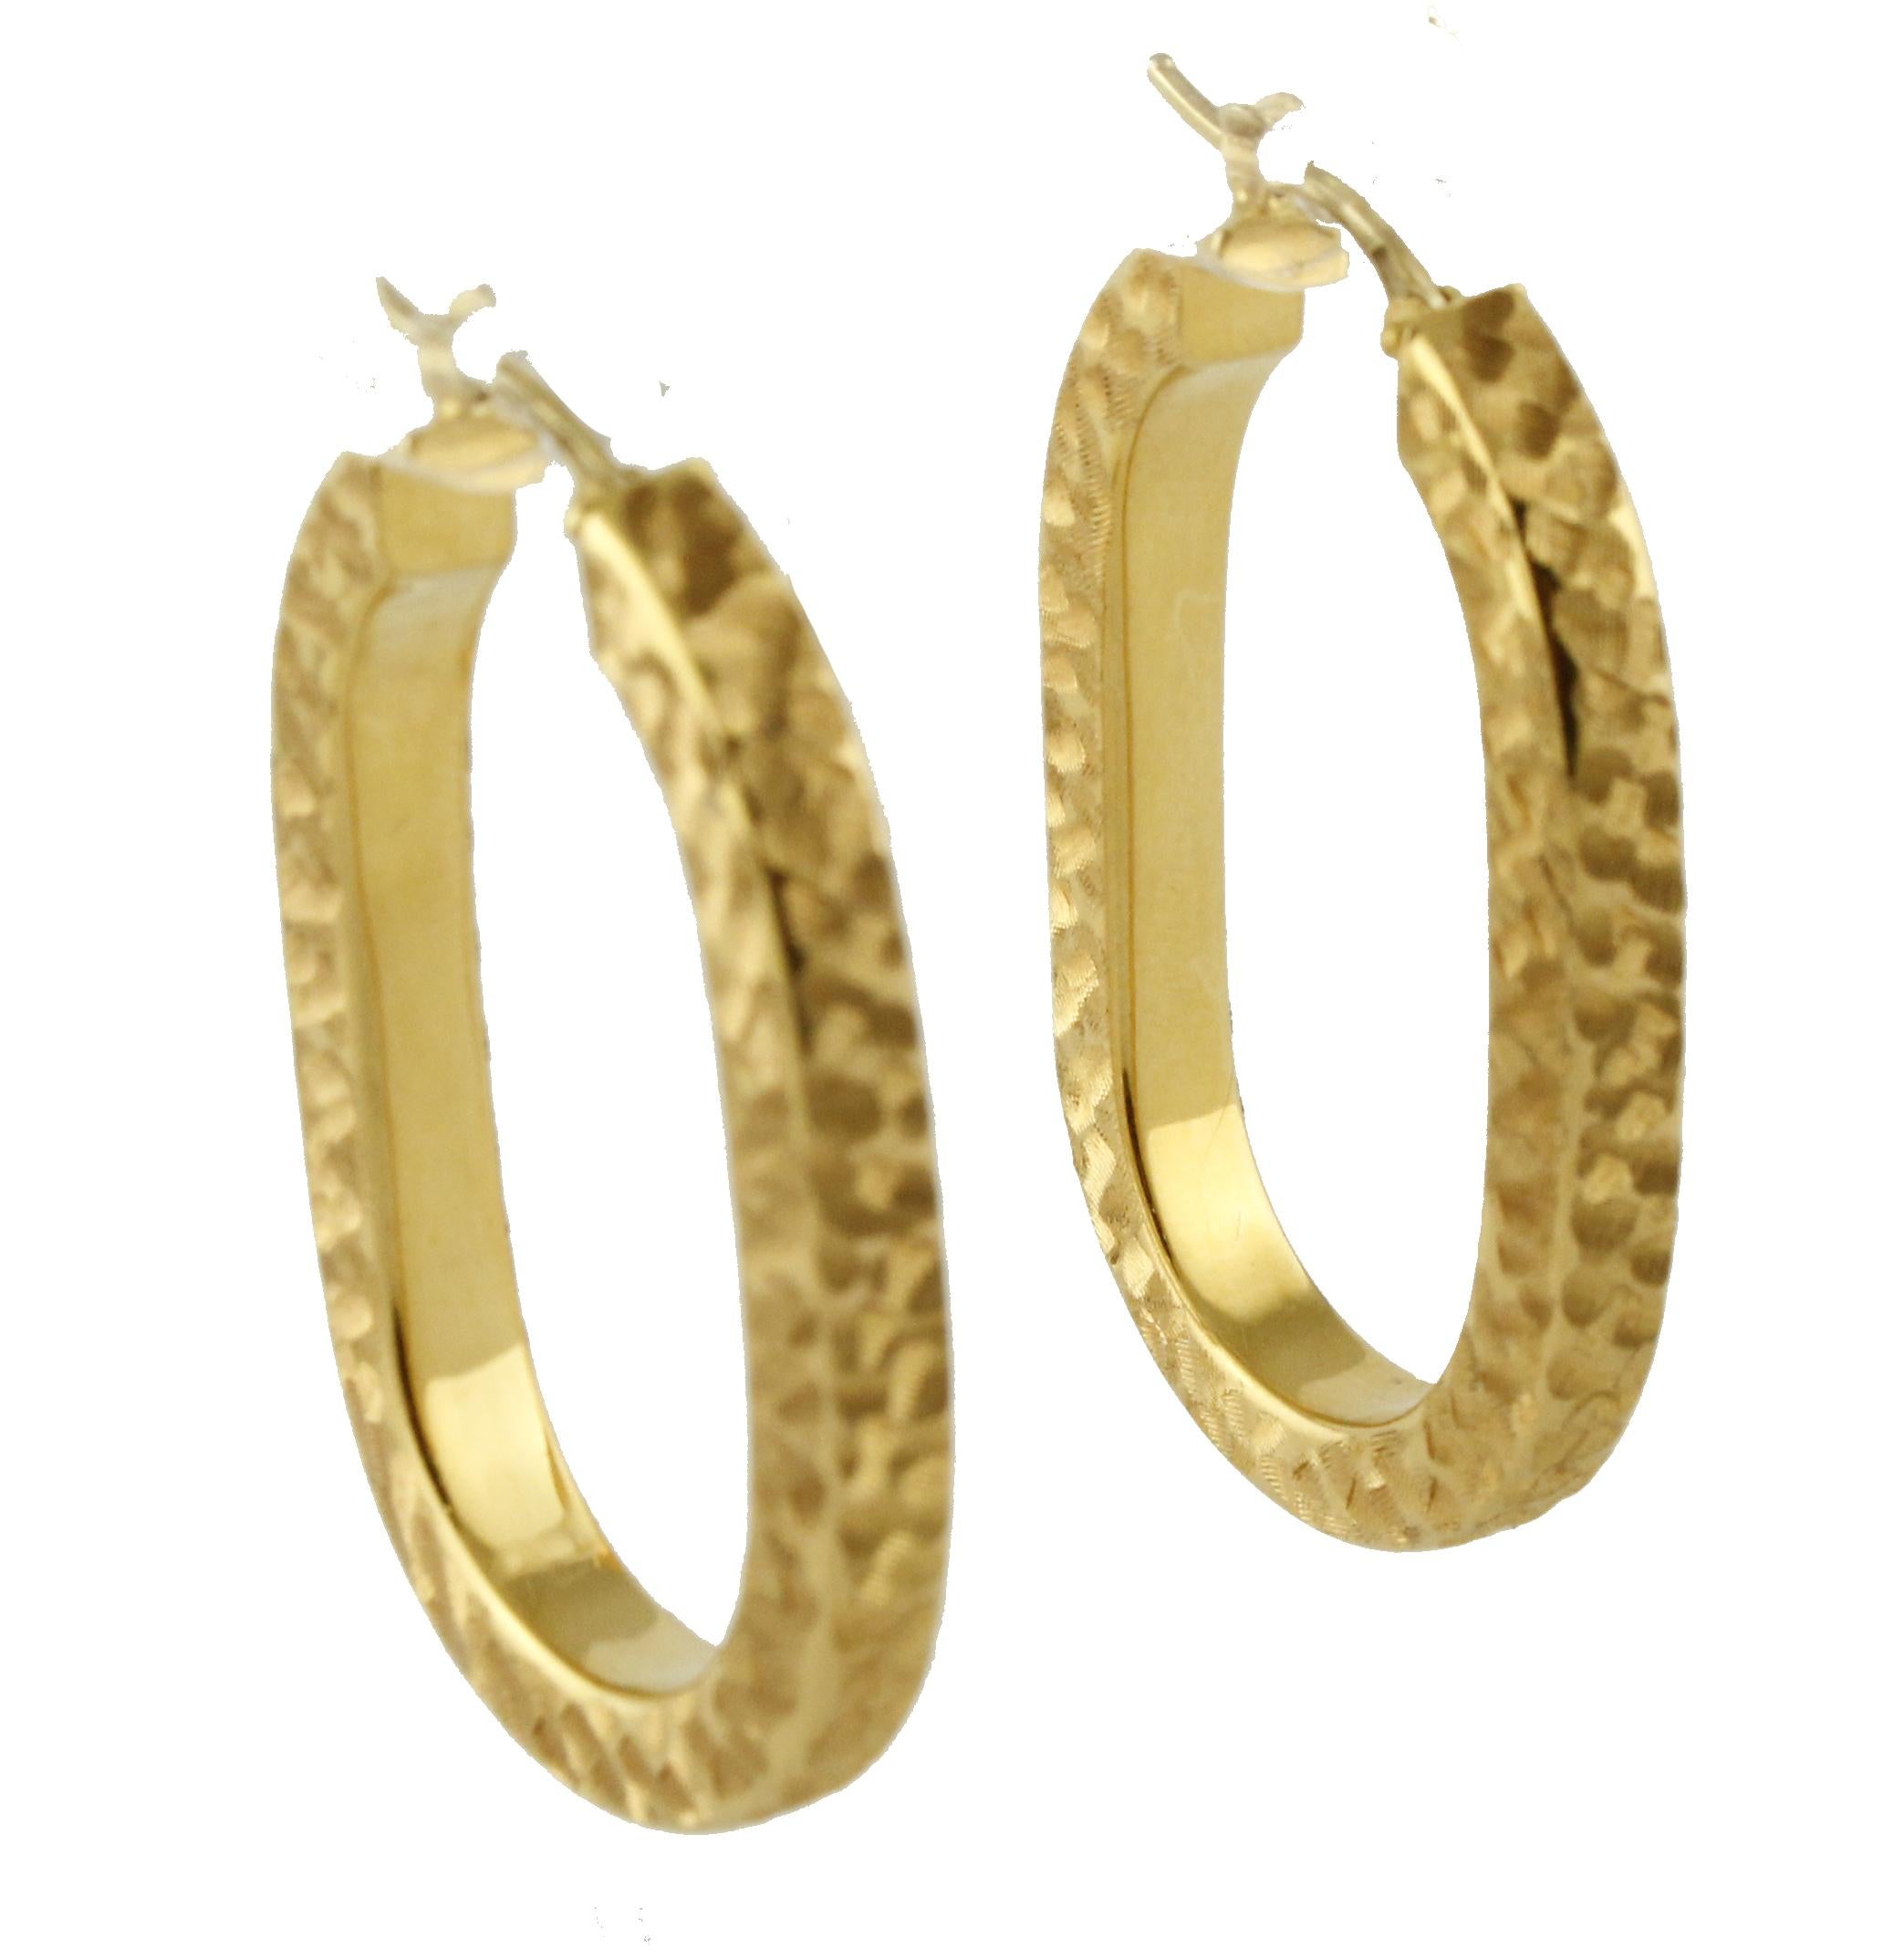 Amazing hoop earrings in worked 18k yellow gold.
Total Weight 8.10 g
R.F + guou
Length 3.9 cm 